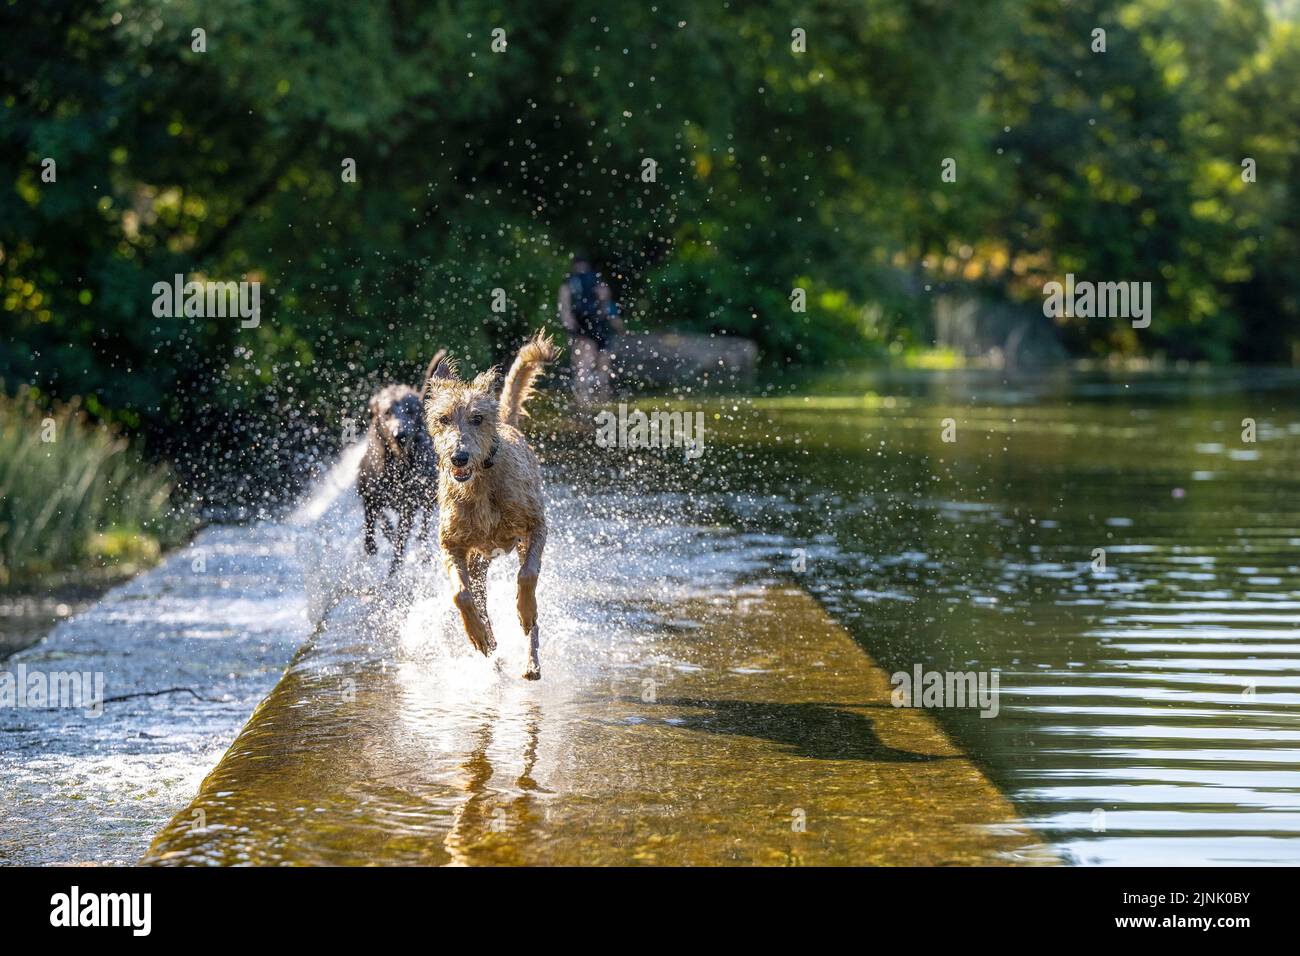 12.08.22. WEATHER SOMERSET.  Two dogs enjoy the water at Warleigh Weir on the River Avon near Bath in Somerset as temperatures continue to soar across Stock Photo